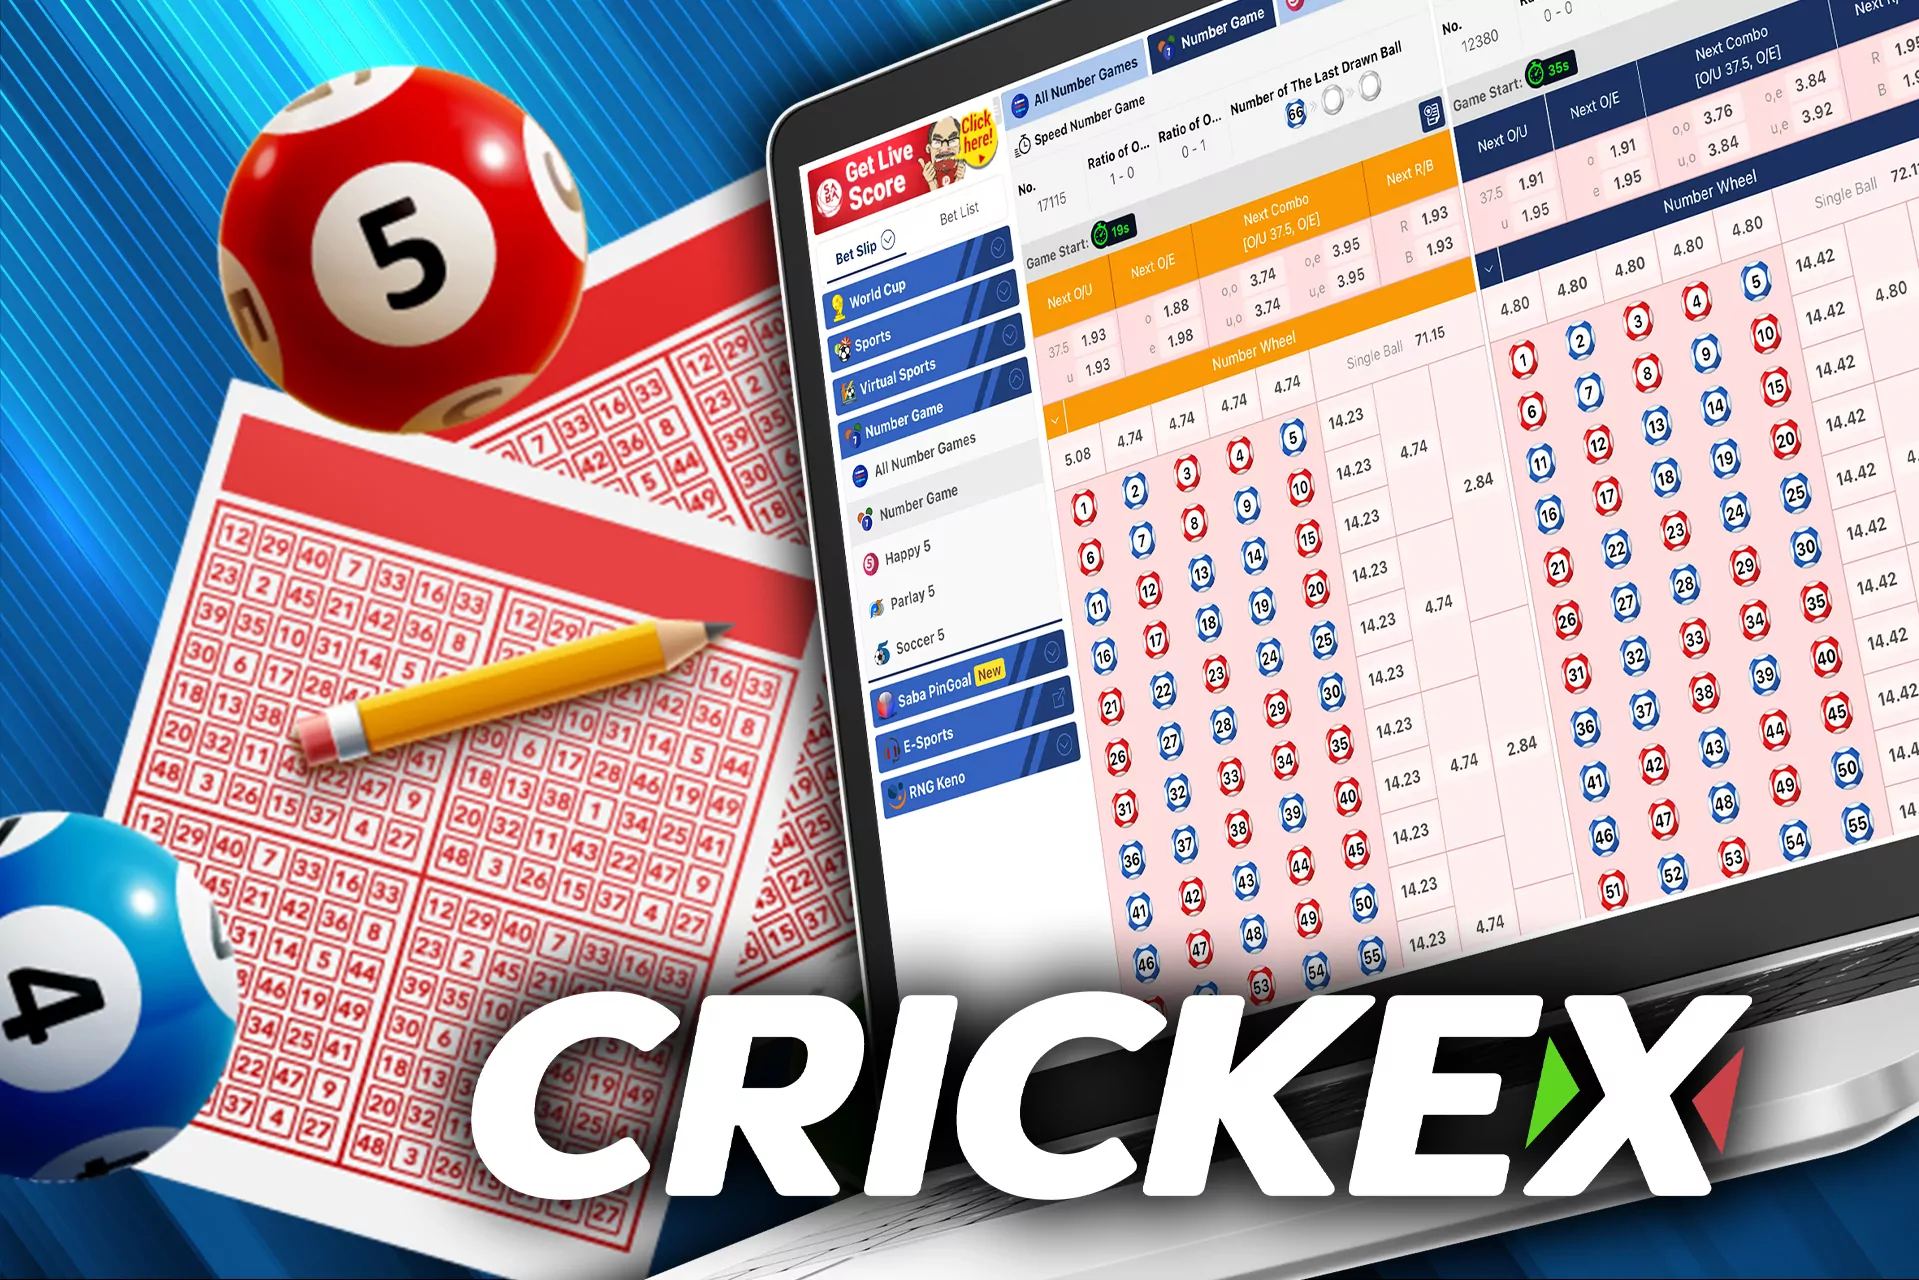 Test your luck and play lottery games at Crickex.